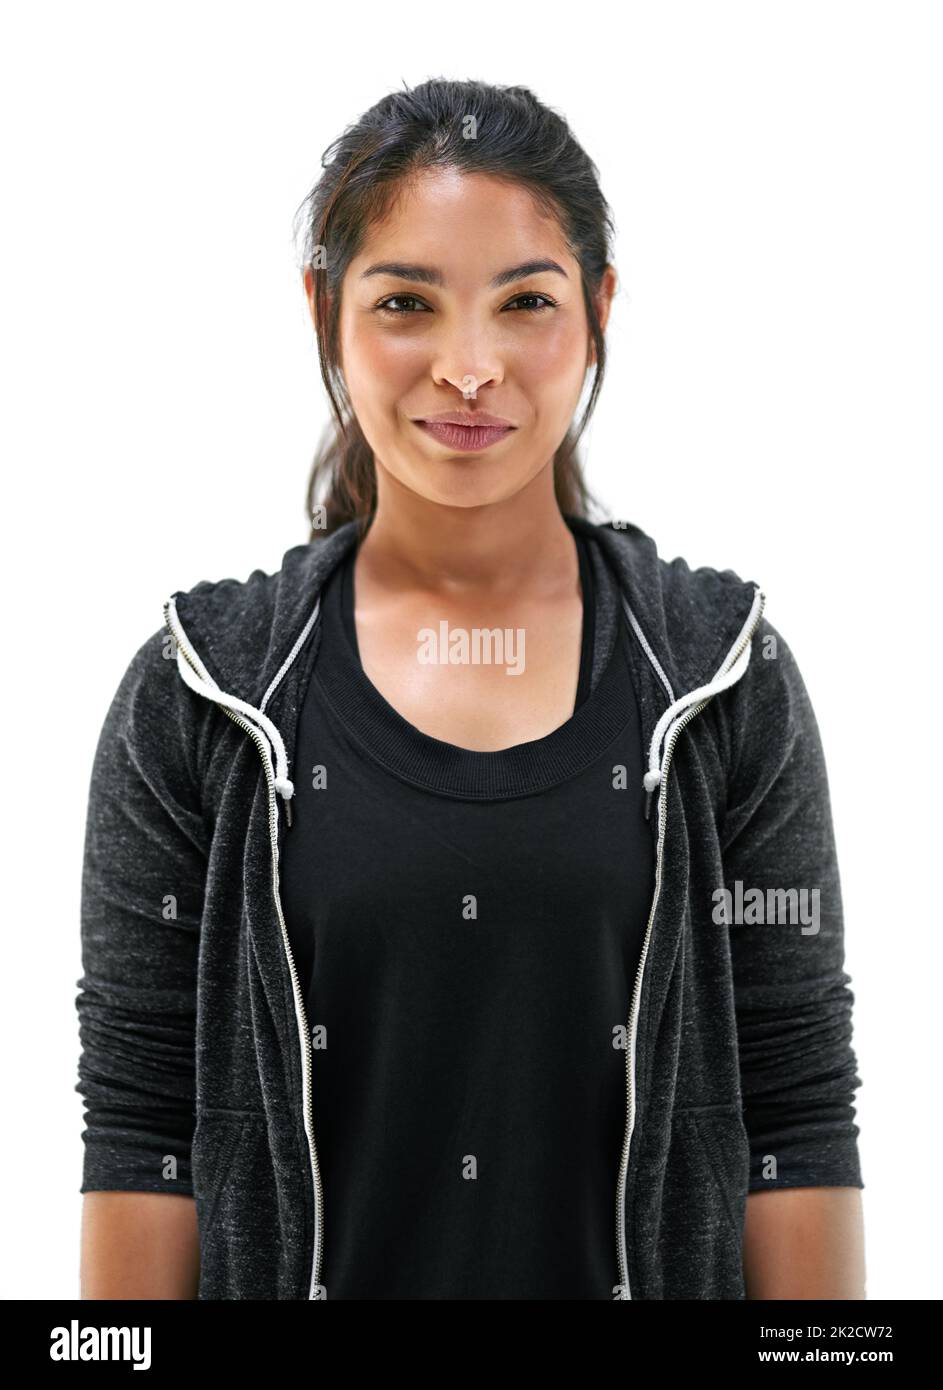 Staying in great shape with daily exercise. Portrait of a fit young woman in sports clothing posing against a white background. Stock Photo